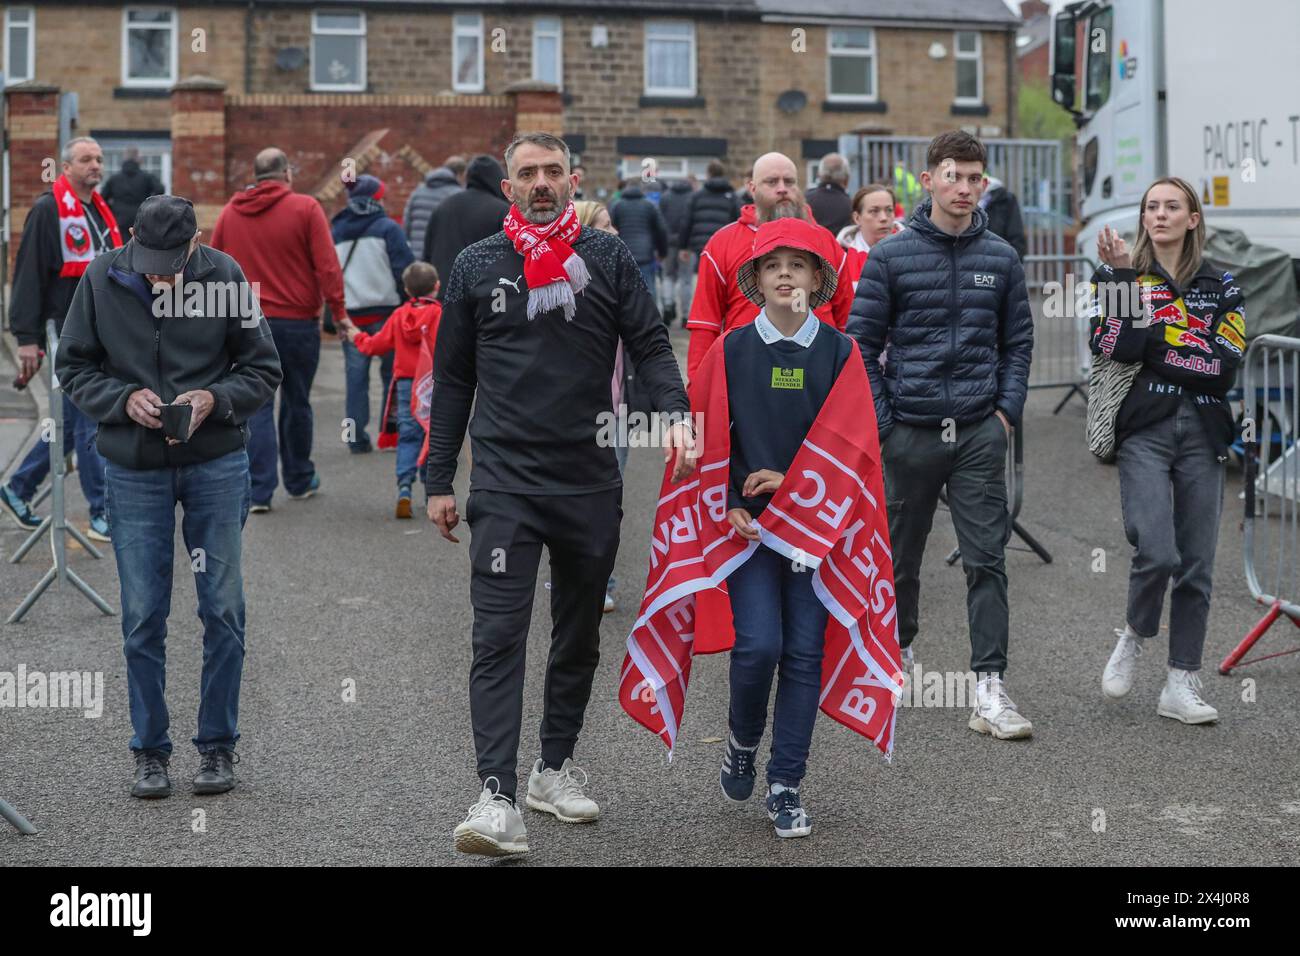 Barnsley fans arrive during the Sky Bet League 1 Sky Bet League 1 Promotion Play-offs Semi-final first leg match Barnsley vs Bolton Wanderers at Oakwell, Barnsley, United Kingdom, 3rd May 2024  (Photo by Alfie Cosgrove/News Images) Stock Photo